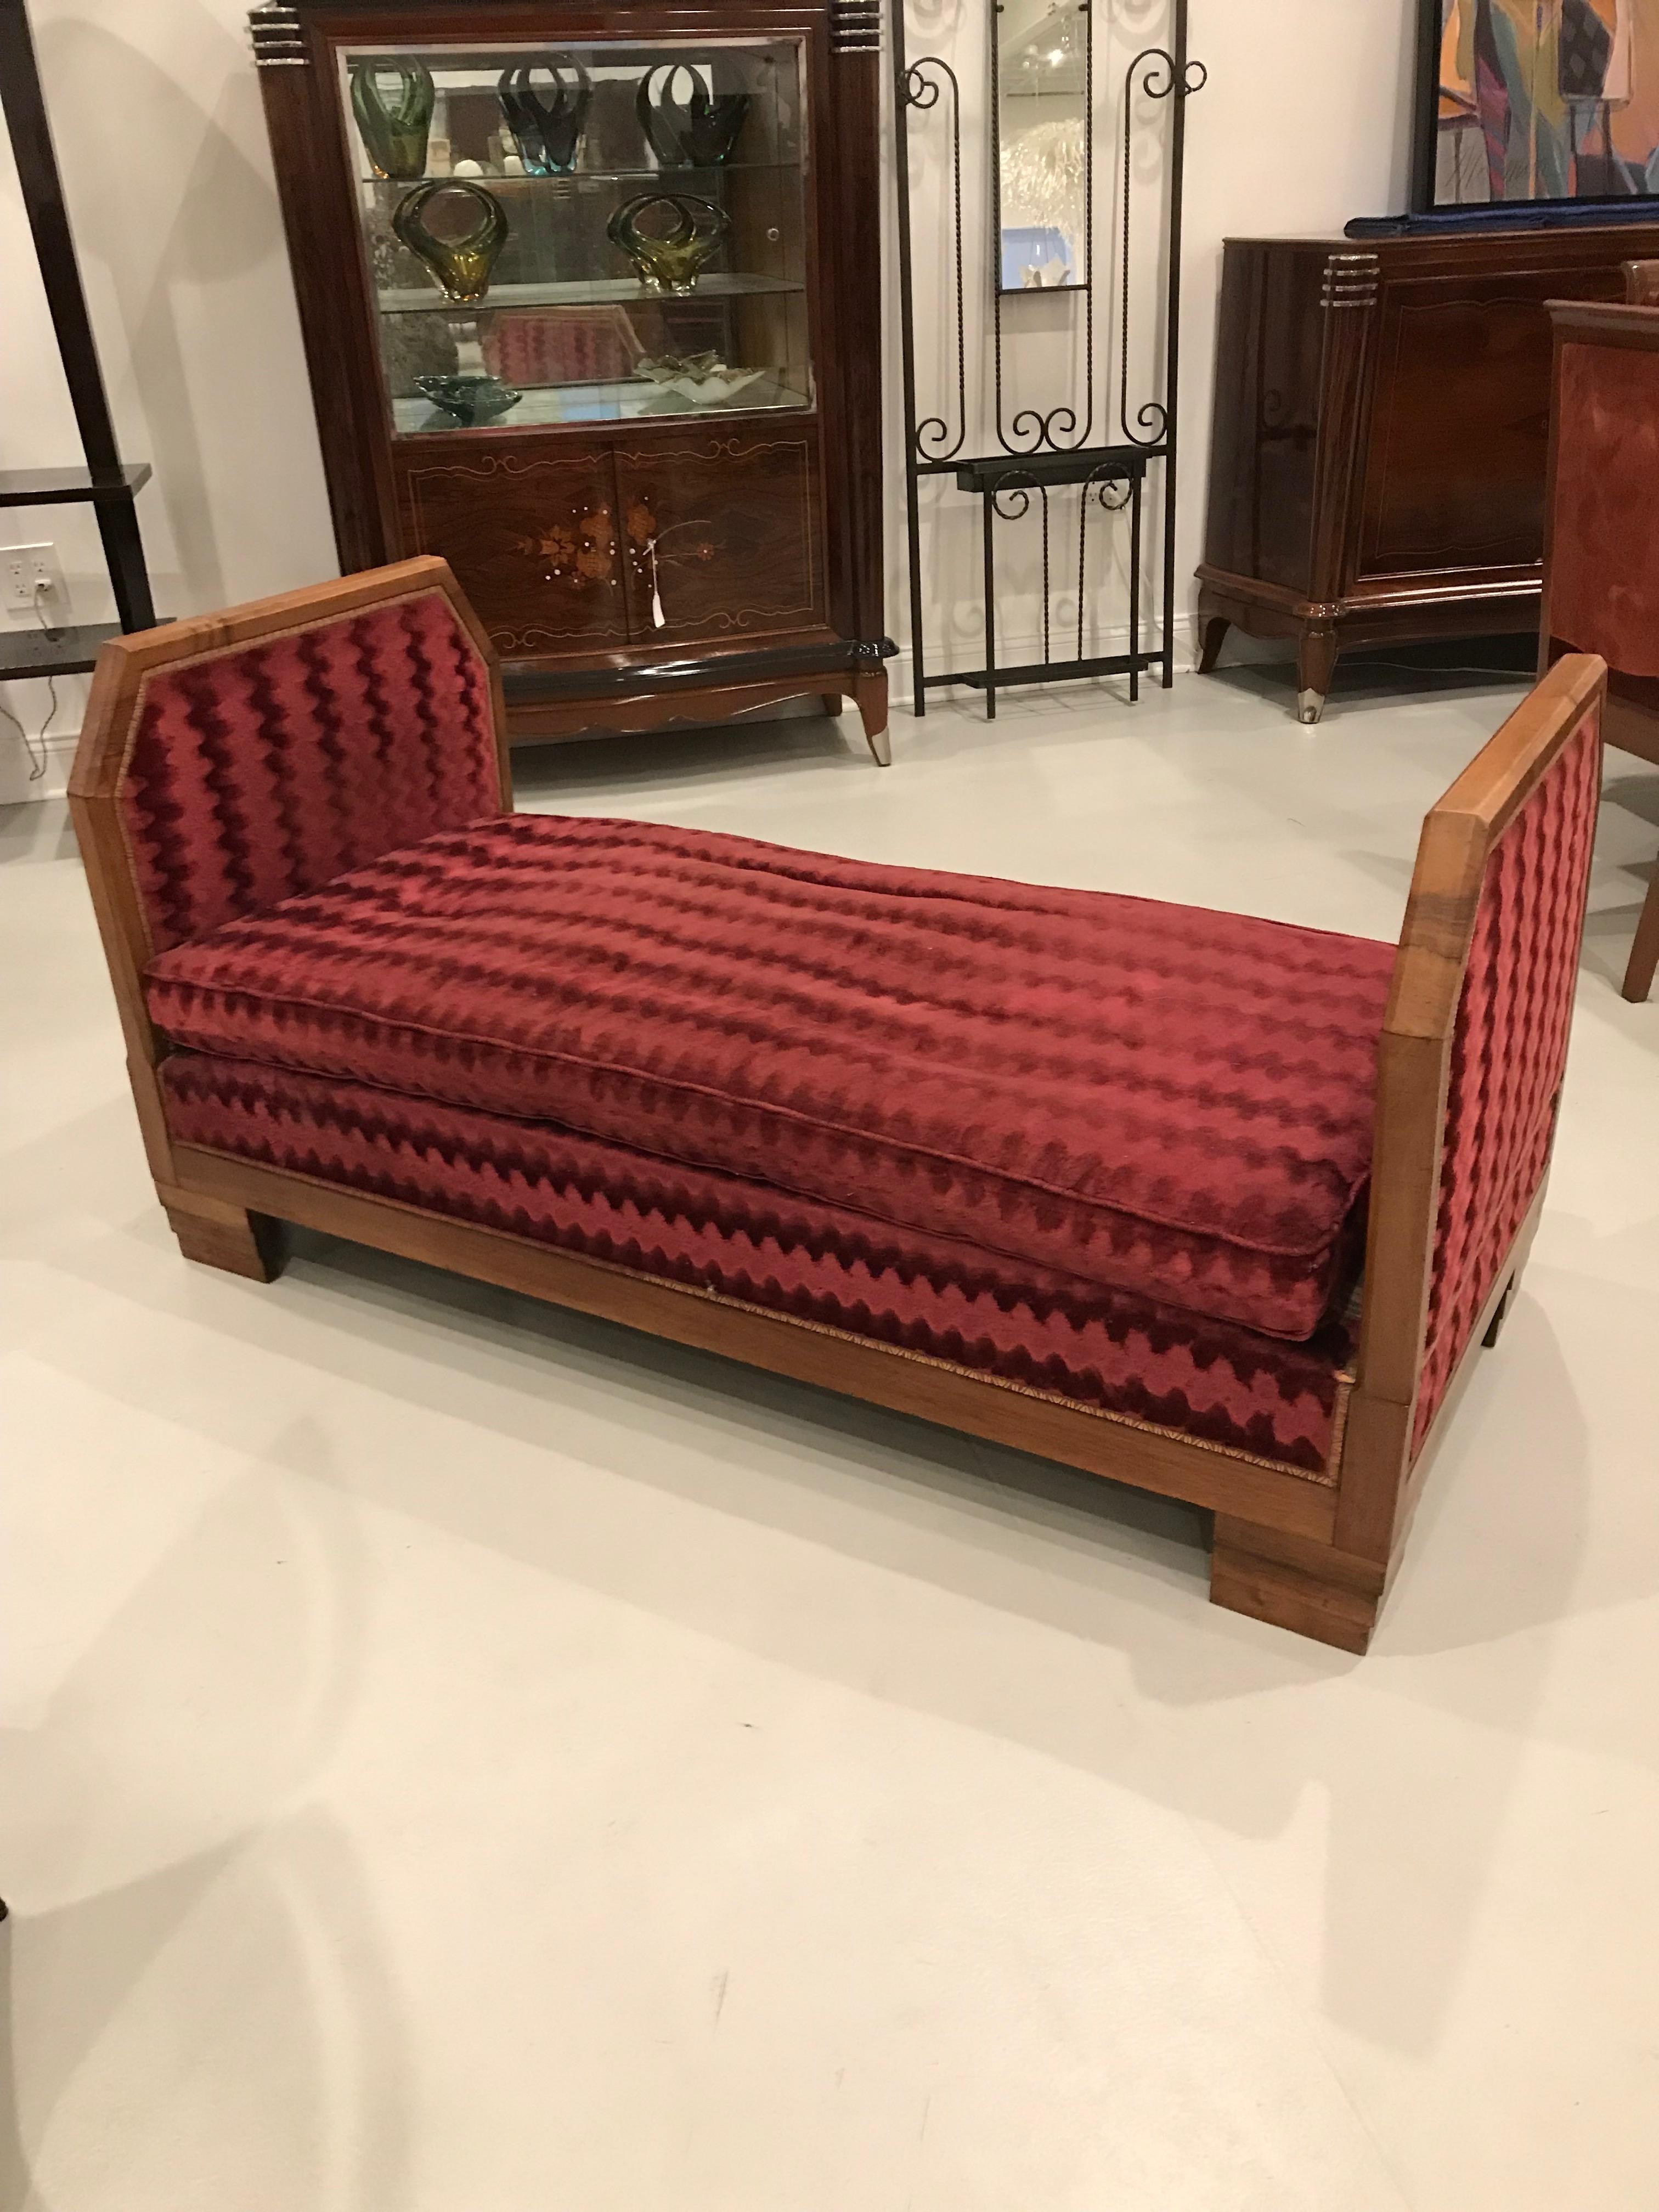 Stunning French Art Deco daybed with original fabric. Perfect for lounging on, one of the ends opens up for full body laying. Beautiful deco details. 

When the daybed is open width is 76 inches.